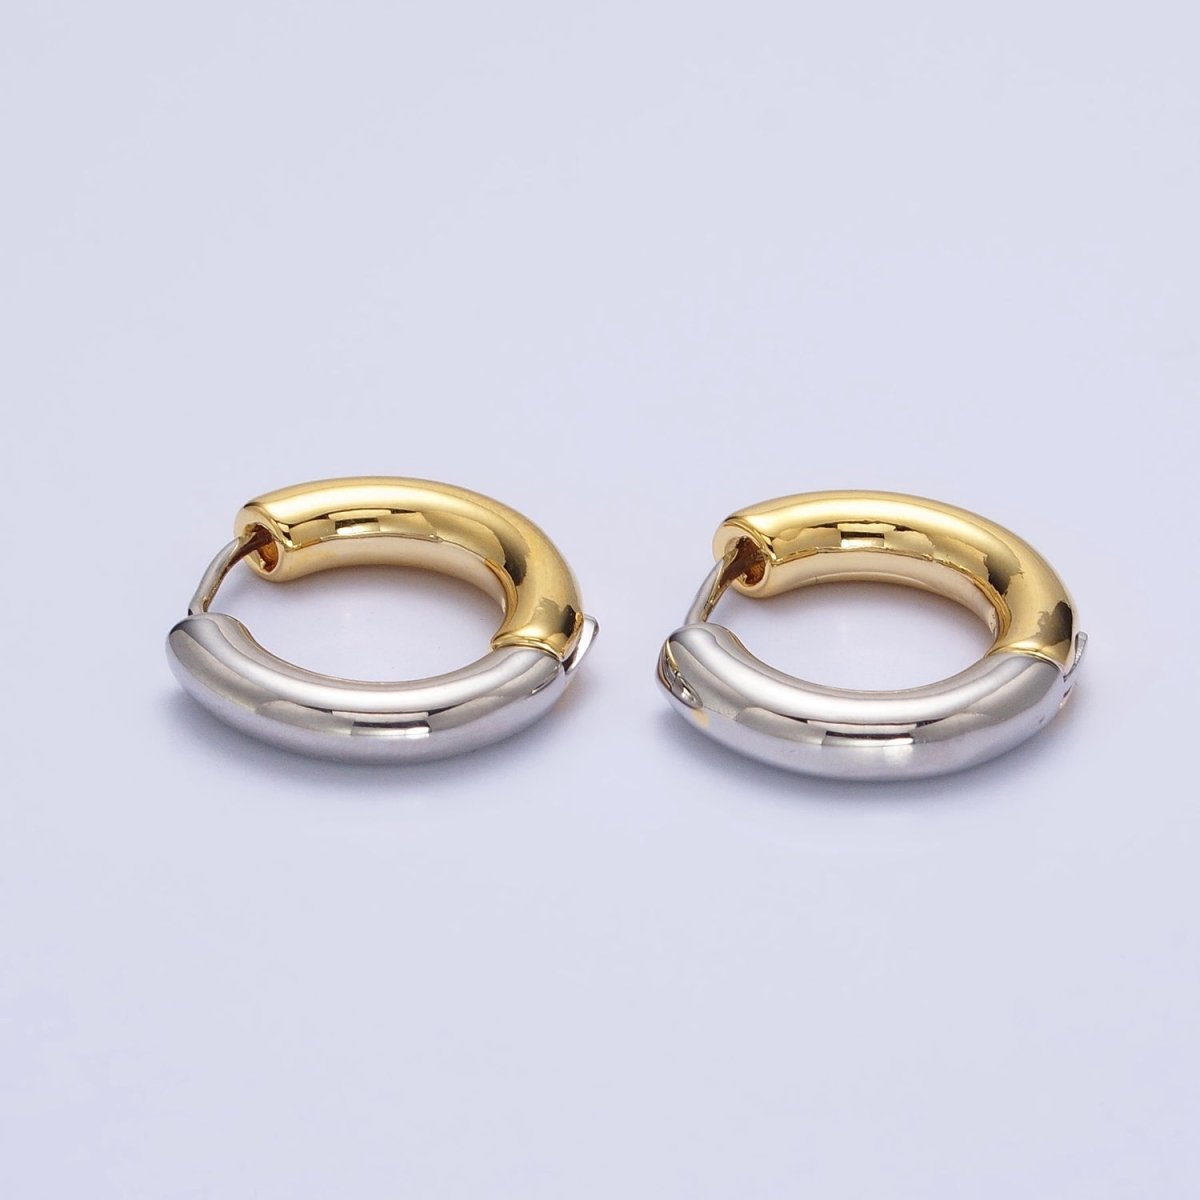 Mixed Metal 16mm, 20mm Gold & Silver Two Tone Statement Huggie Earrings | AB-572 AB-573 - DLUXCA